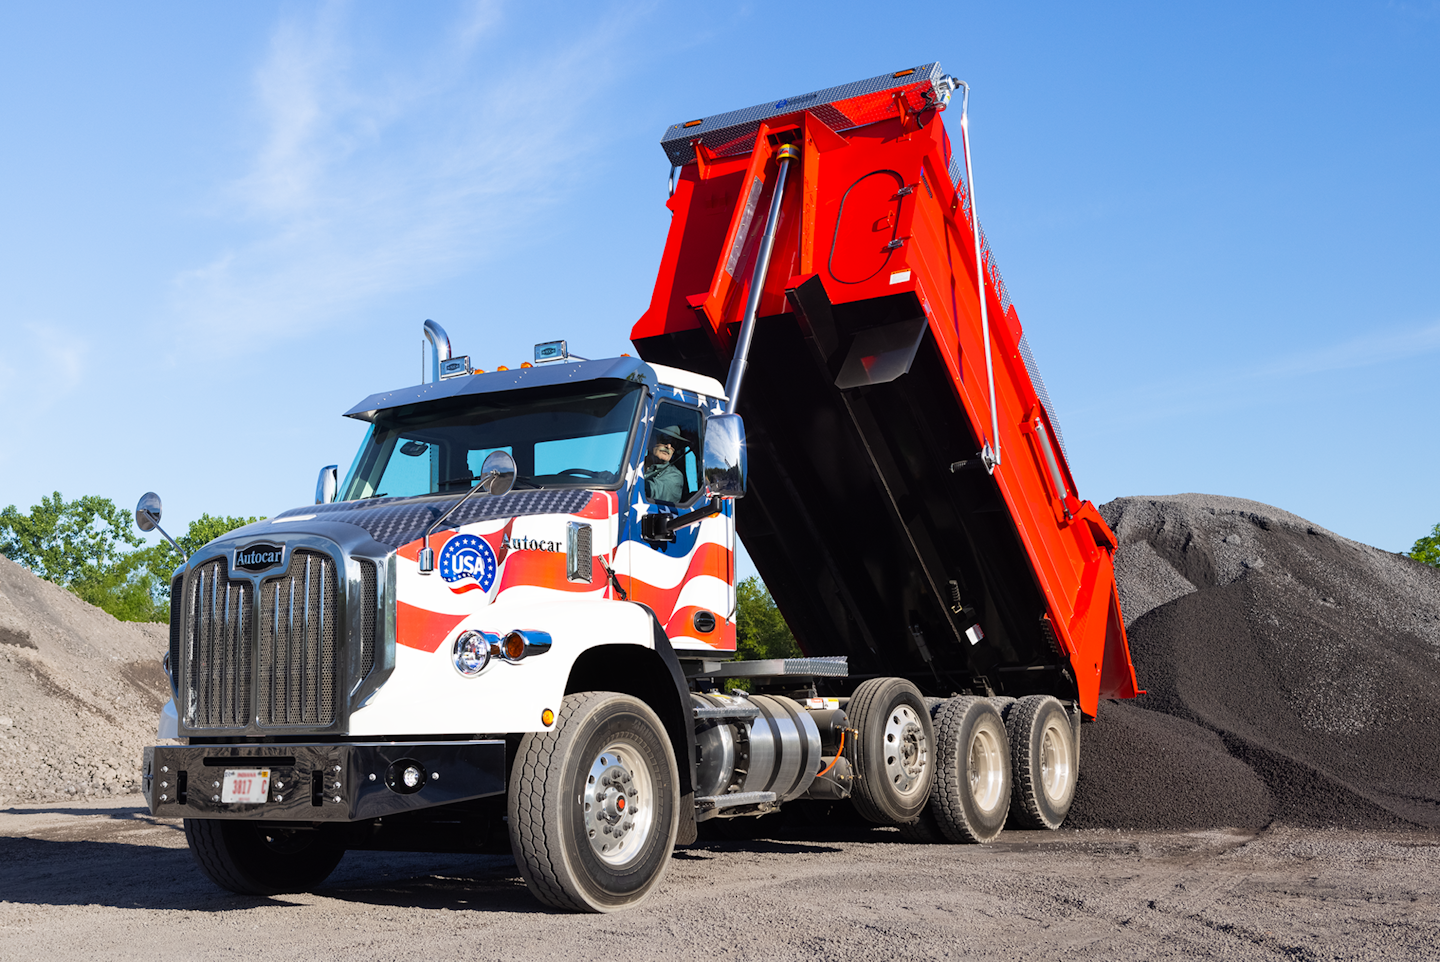 The Autocar Badass truck is outfitted with an RS Godwin SCS dump body and features Hardox steel.